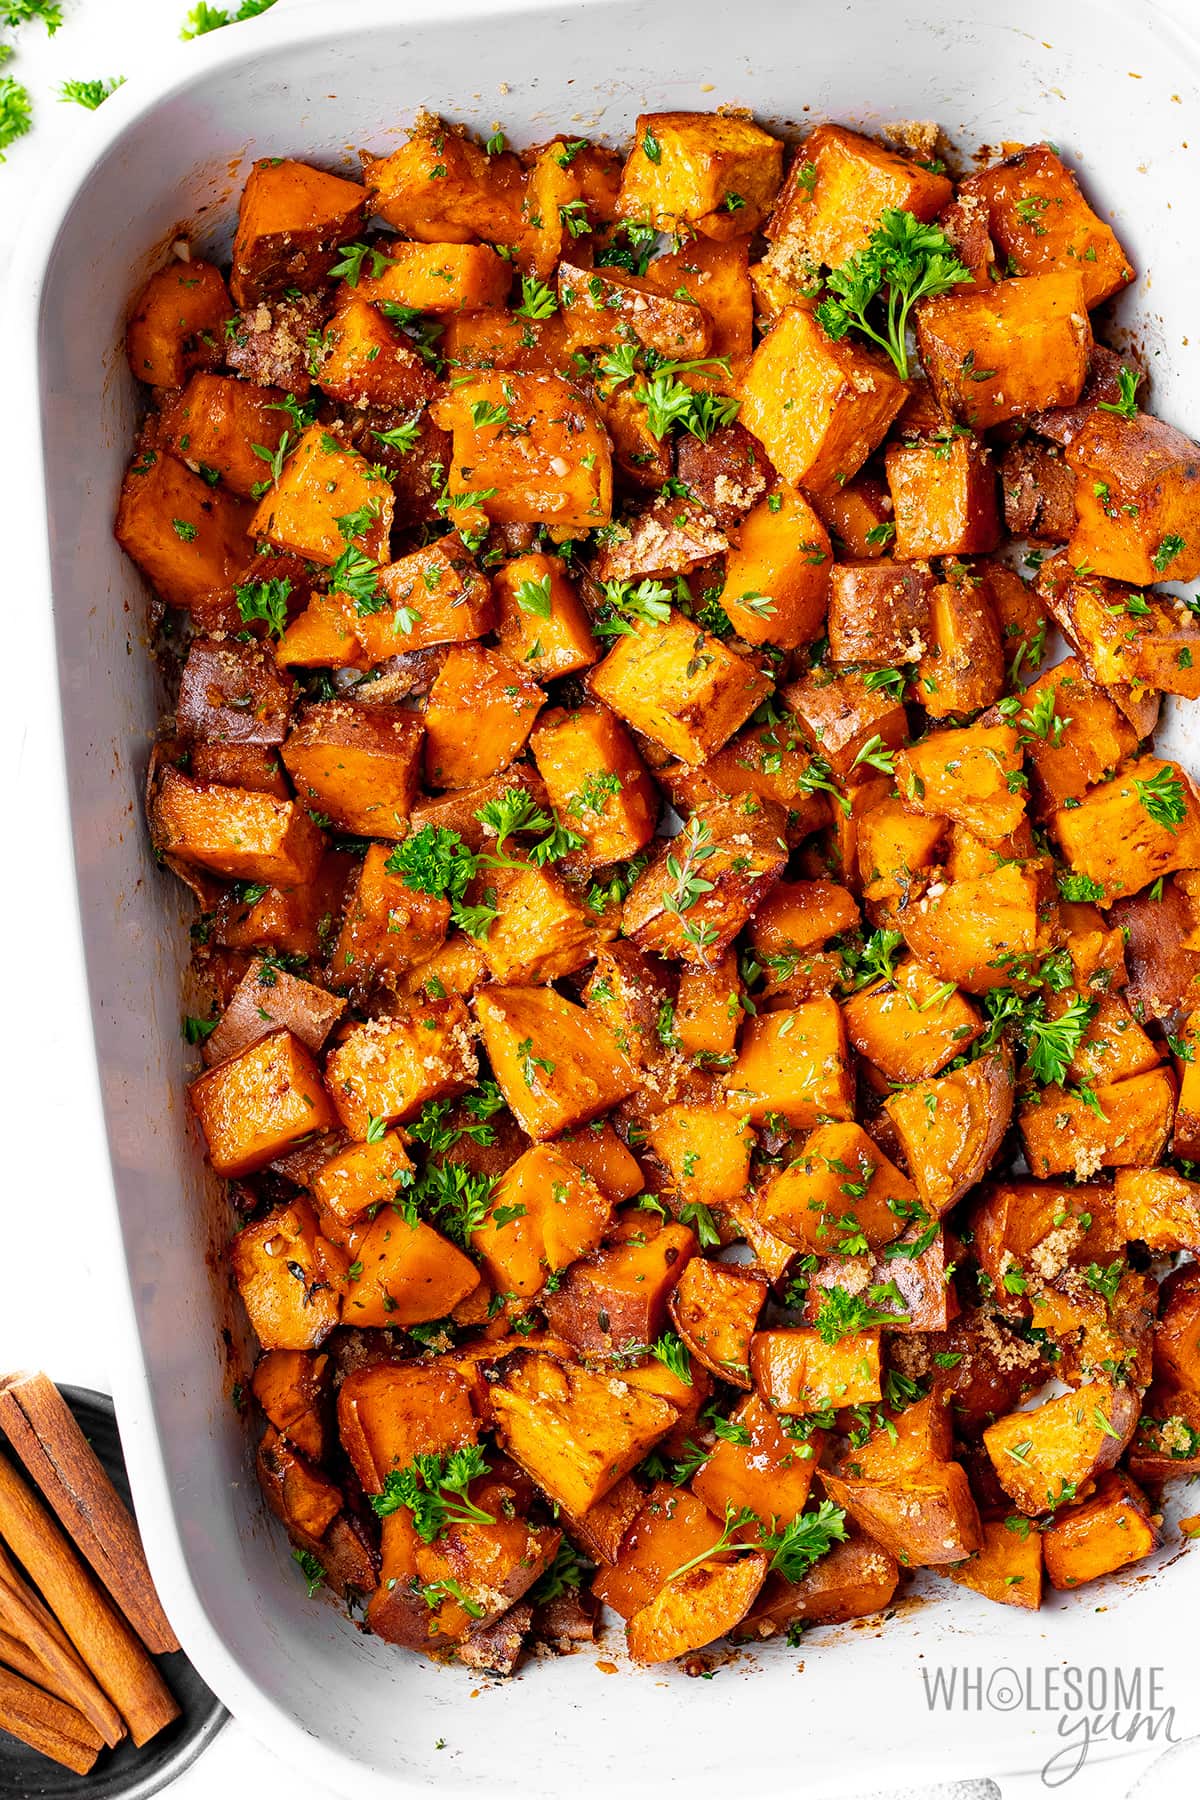 Oven roasted sweet potatoes mixed with butter and herbs.